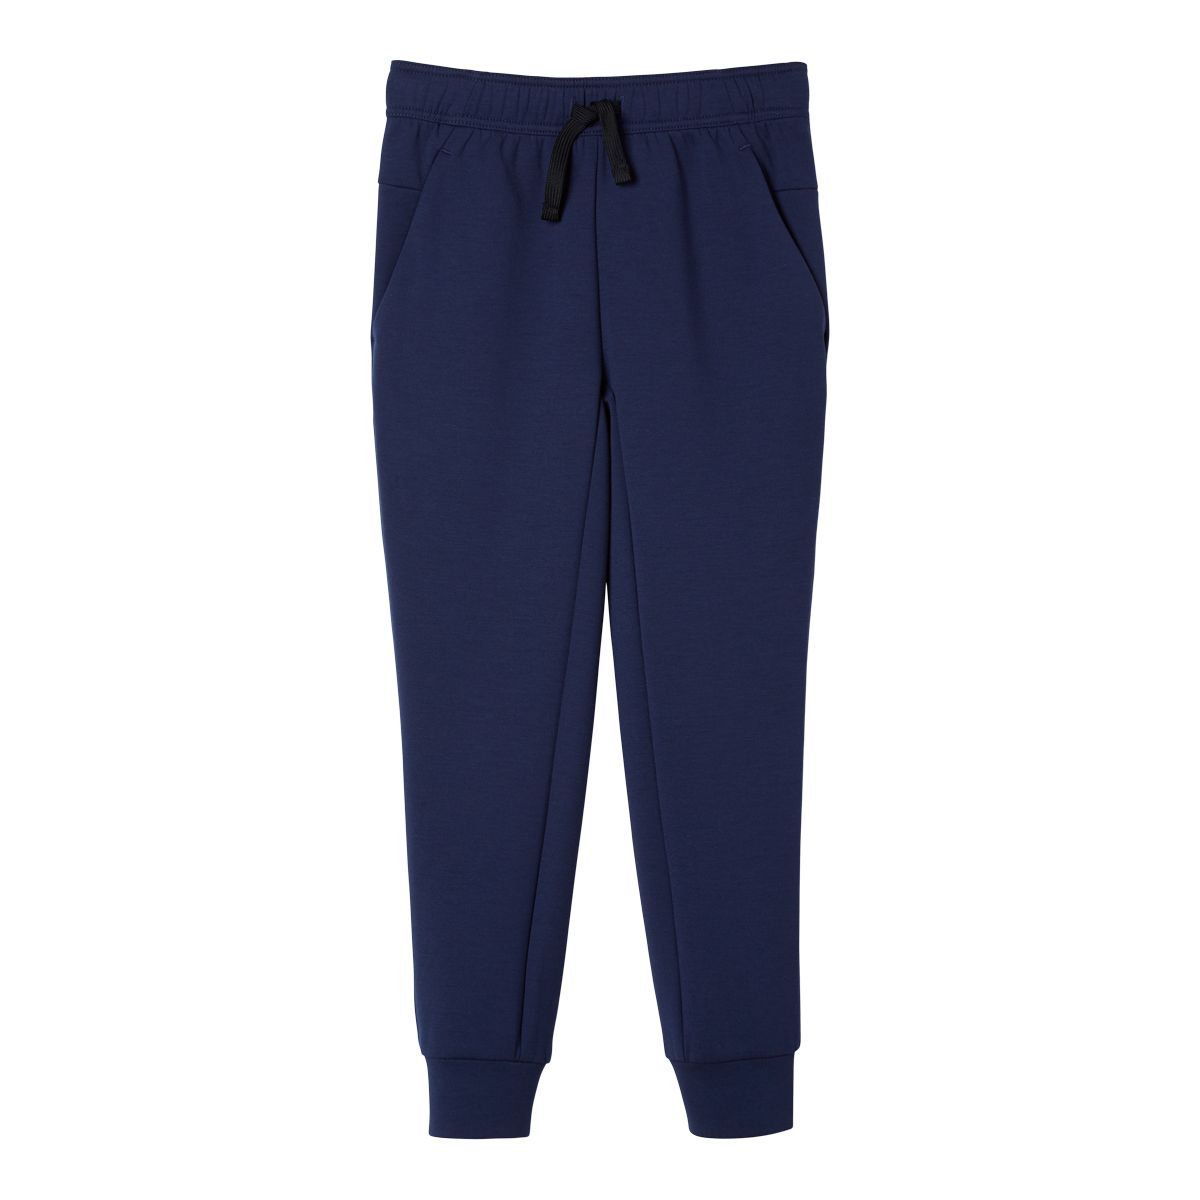 FWD Boys' Spacer Knit Pants